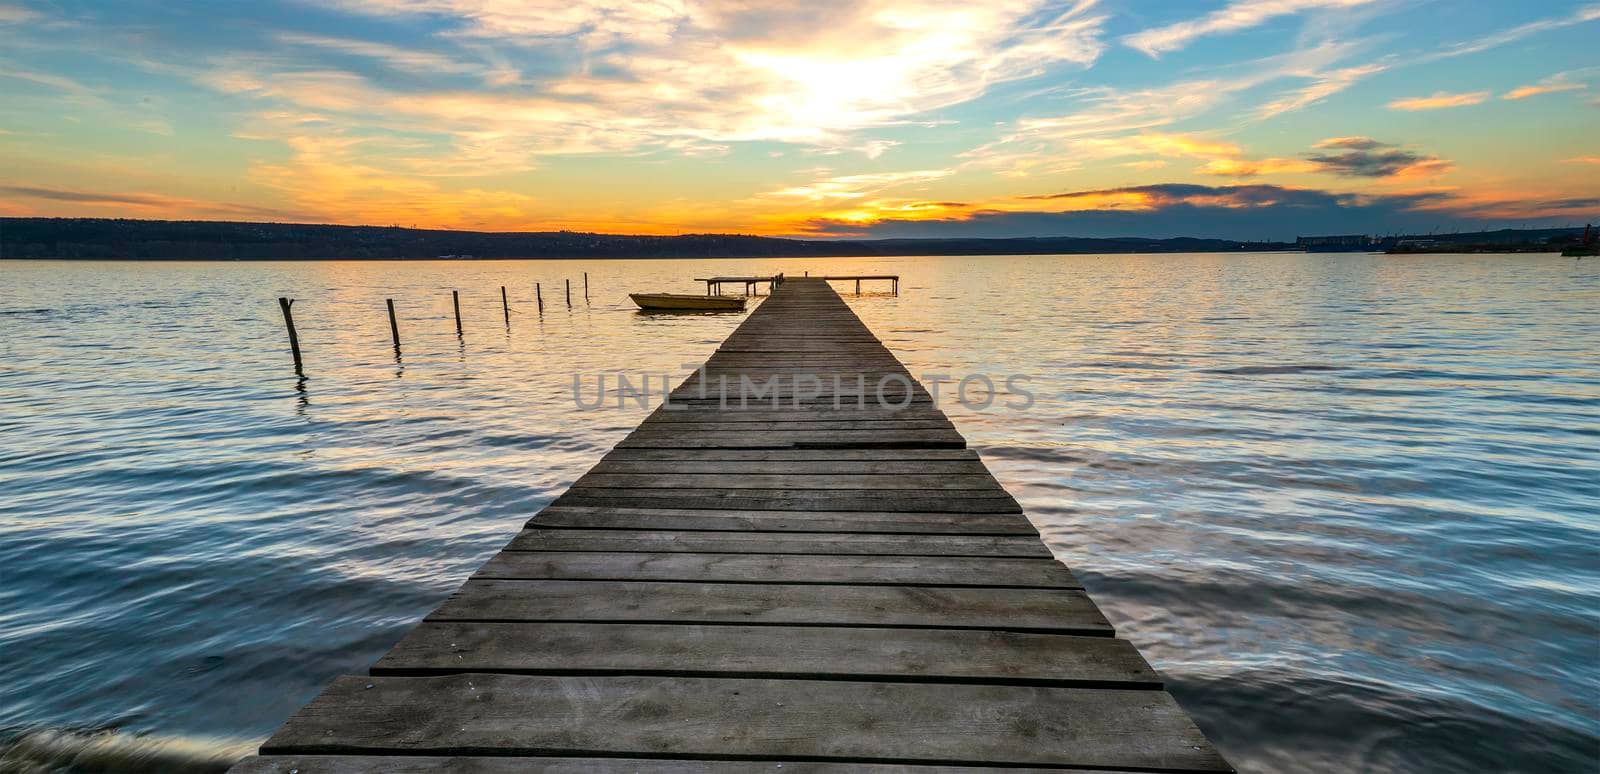 Exciting twilight at the shore with wooden pier and moored boat by EdVal